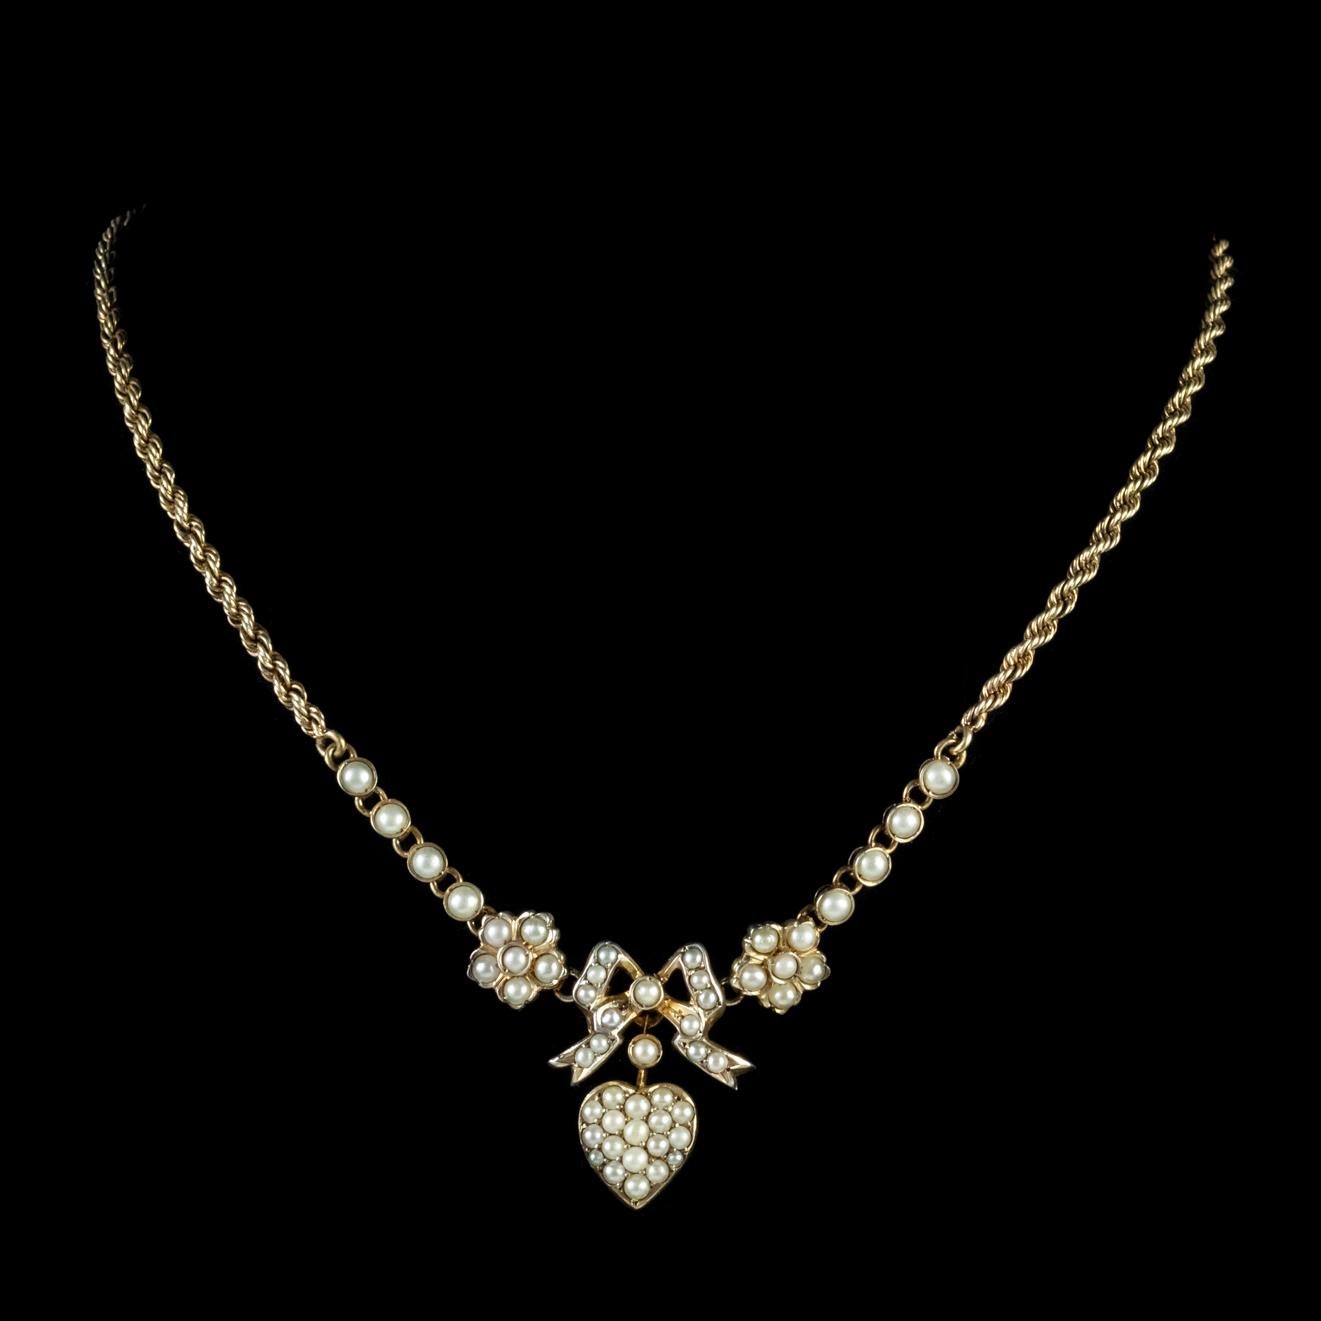 Women's Antique Edwardian Pearl Heart Necklace Silver 15 Carat Gold, circa 1910 For Sale